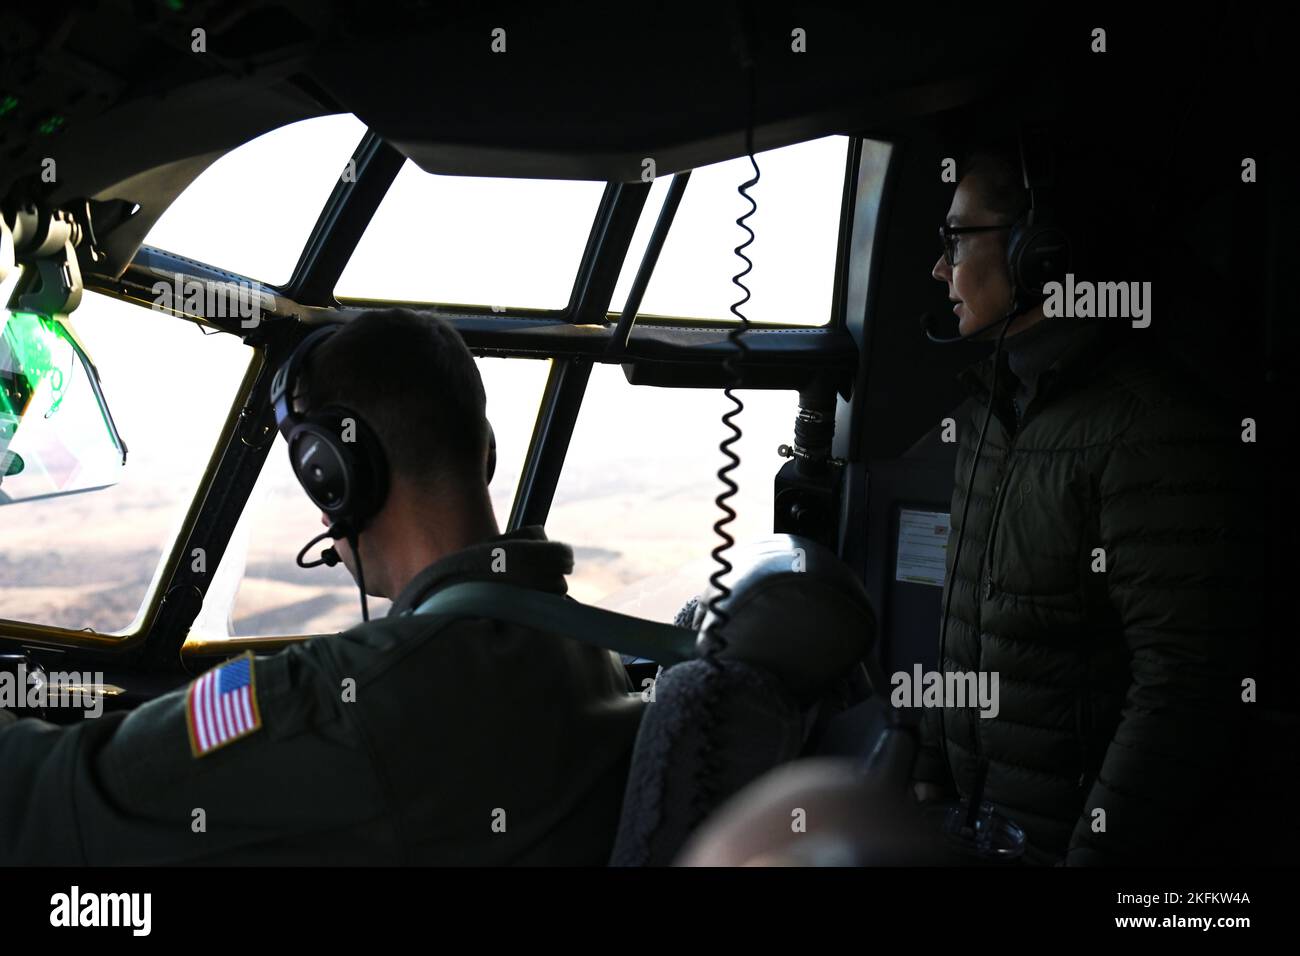 U.S. Rep. Mary Peltola, representative of Alaska, looks out of the cockpit window of a Coast Guard C-130 Hercules airplane from Air Station Kodiak, Sept. 24, 2022. Rep. Peltola worked with the Coast Guard to assess damage to Western Alaskan villages and communities caused by Typhoon Merbok. U.S. Coast Guard photo by Petty Officer 3rd Class Ian Gray. Stock Photo